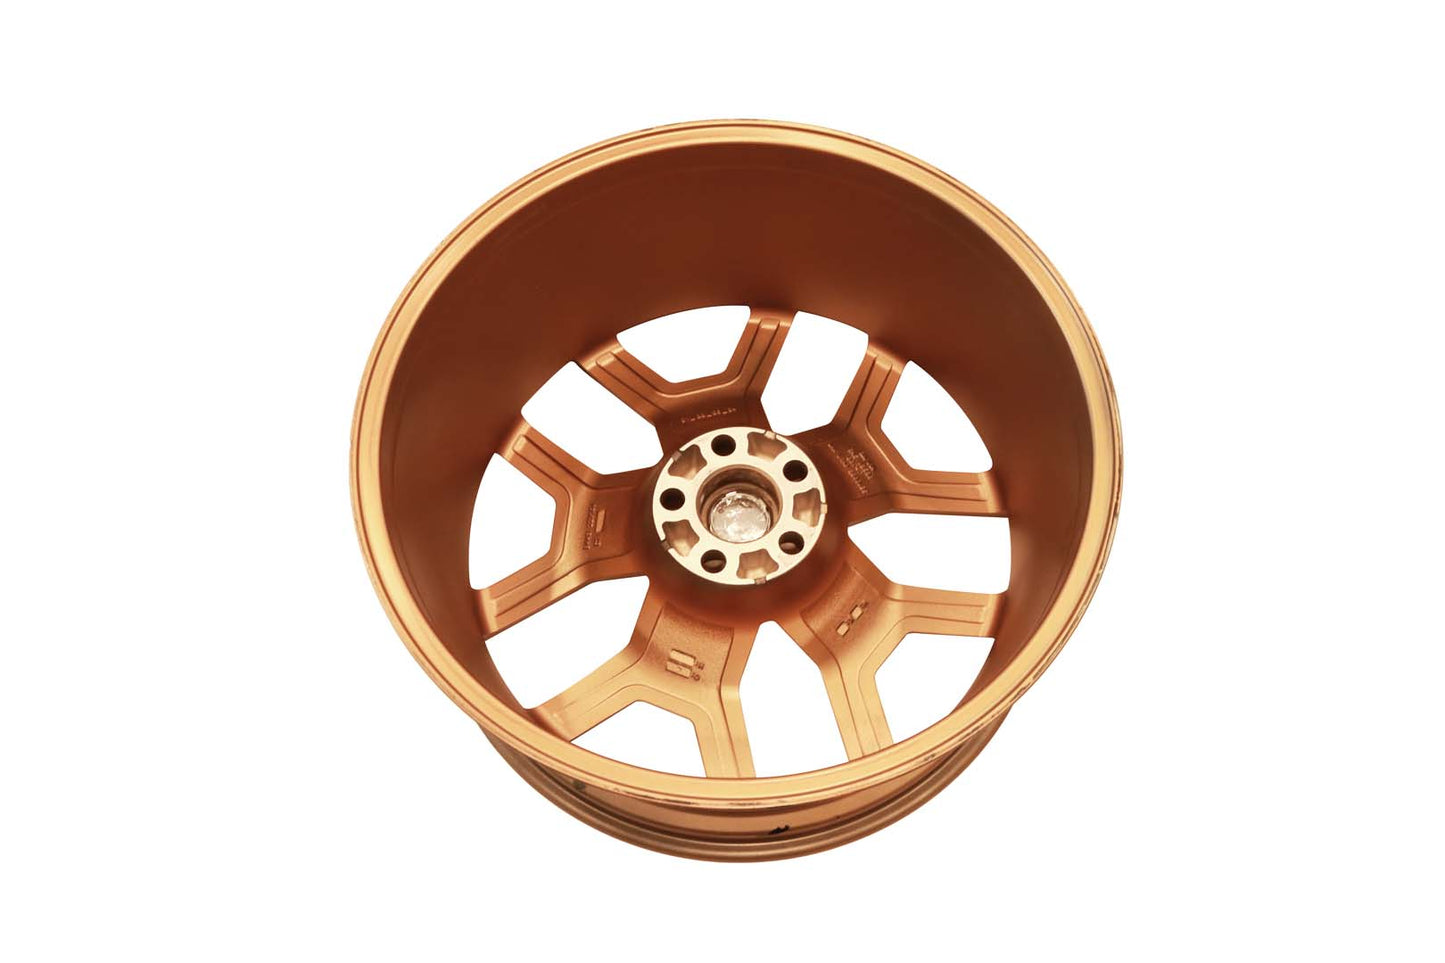 22 INCH ELITE EDITION ALLOY WHEEL FOR LAND ROVER - COPPER